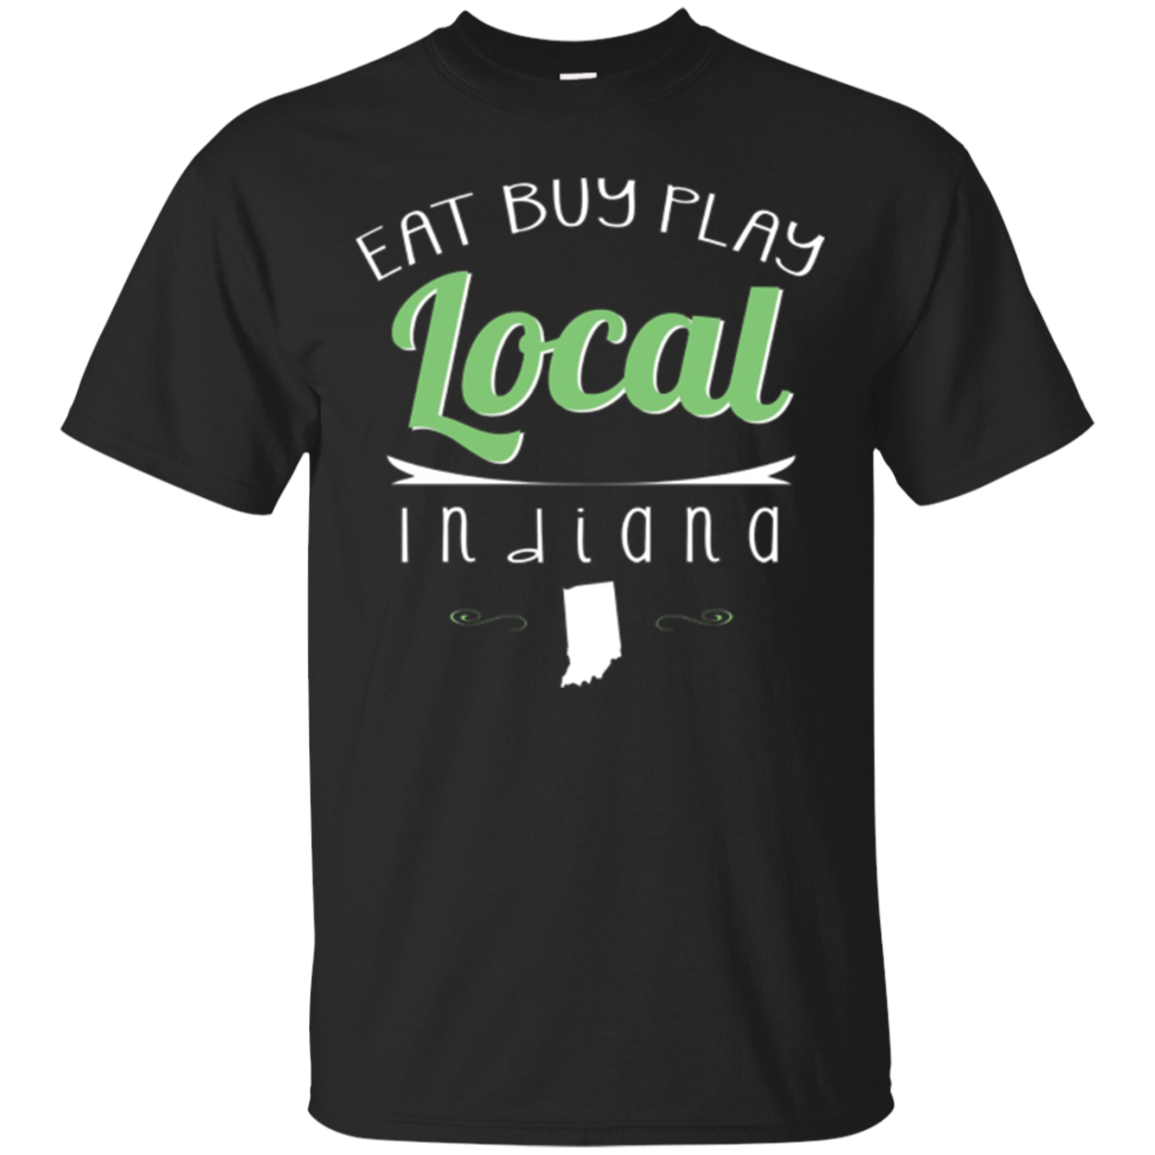 Eat Buy Play Local Indiana Distressed T-shirt